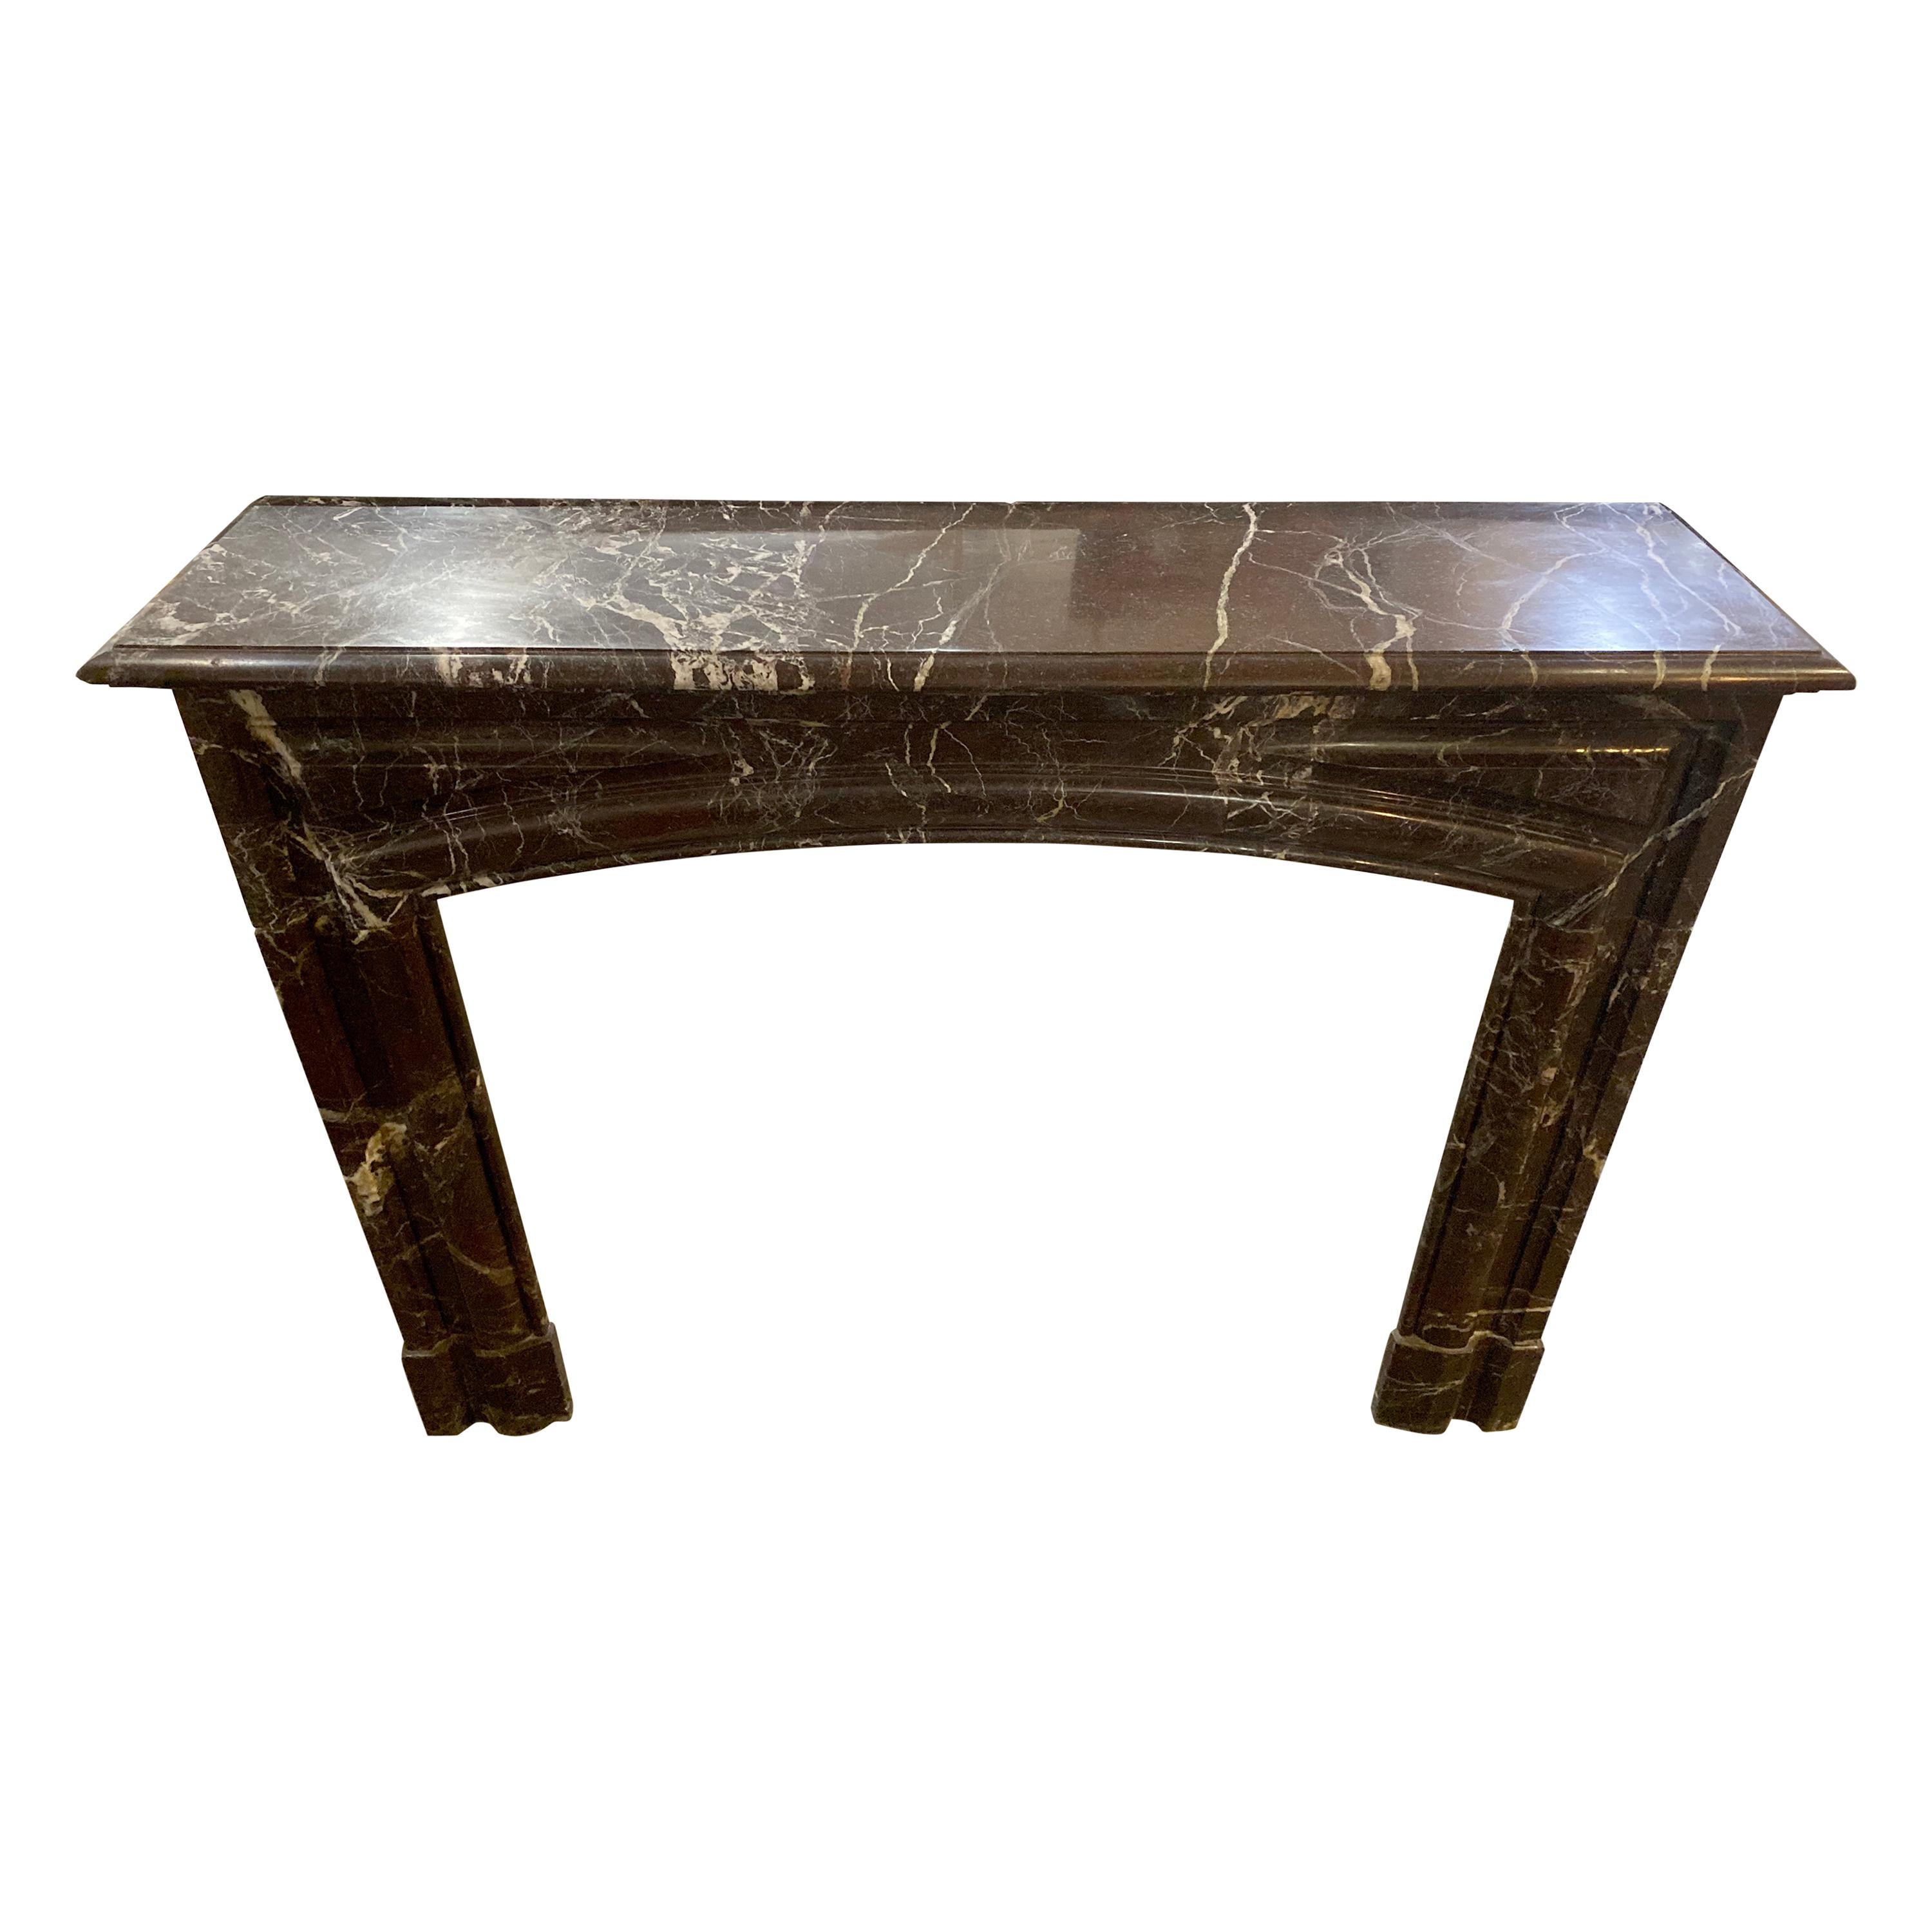 Antique French Marble Mantel, circa 1850